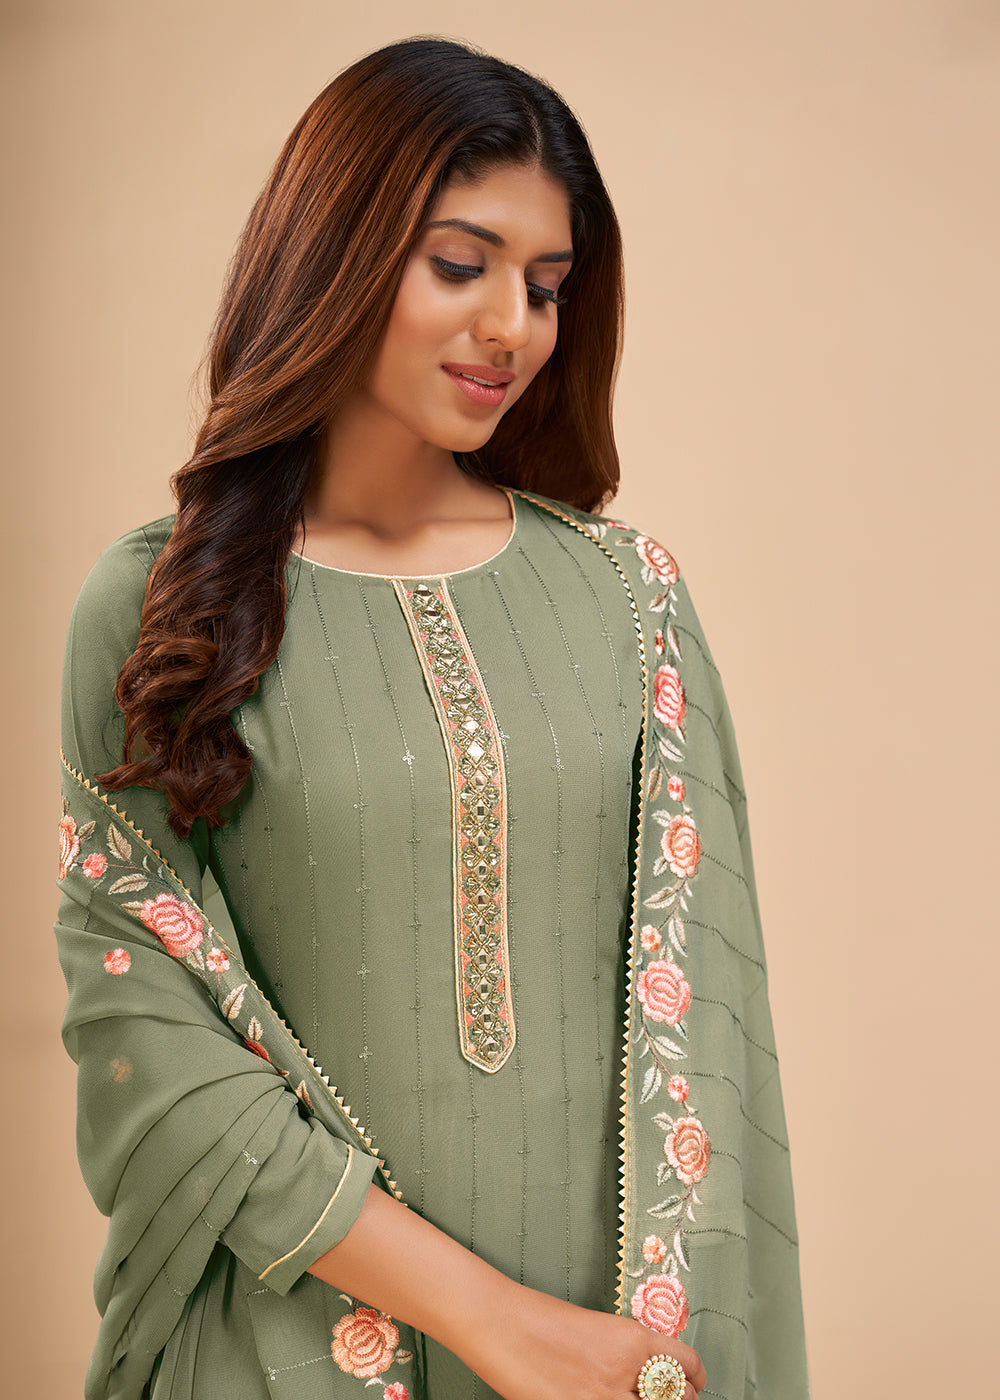 Buy Now Dusty Green Floral Embroidered Festive Pant Style Salwar Suit Online in USA, UK, Canada & Worldwide at Empress Clothing. 